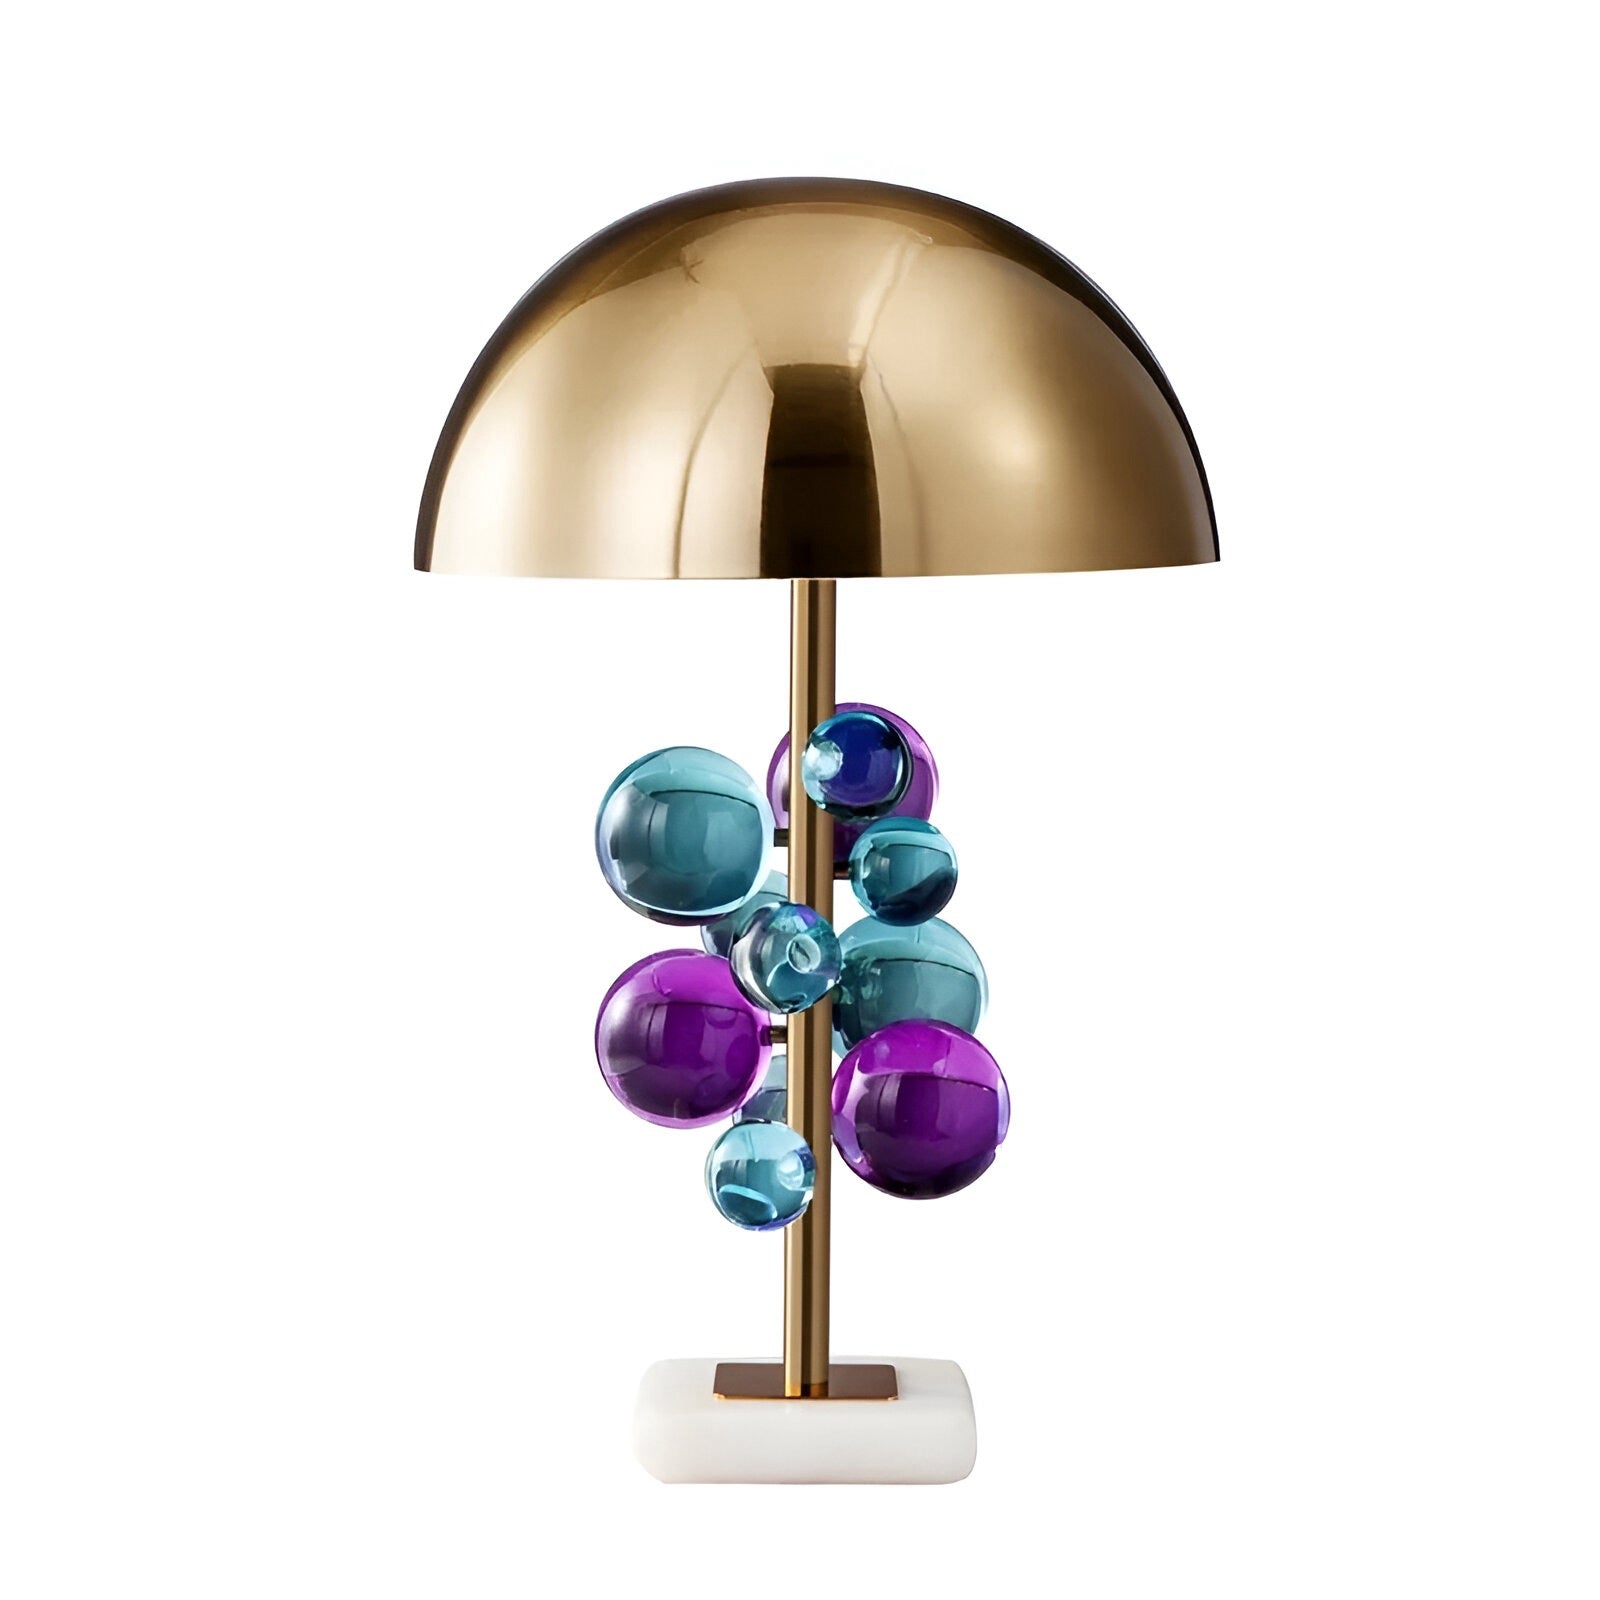 Tischlampe Palle Colore